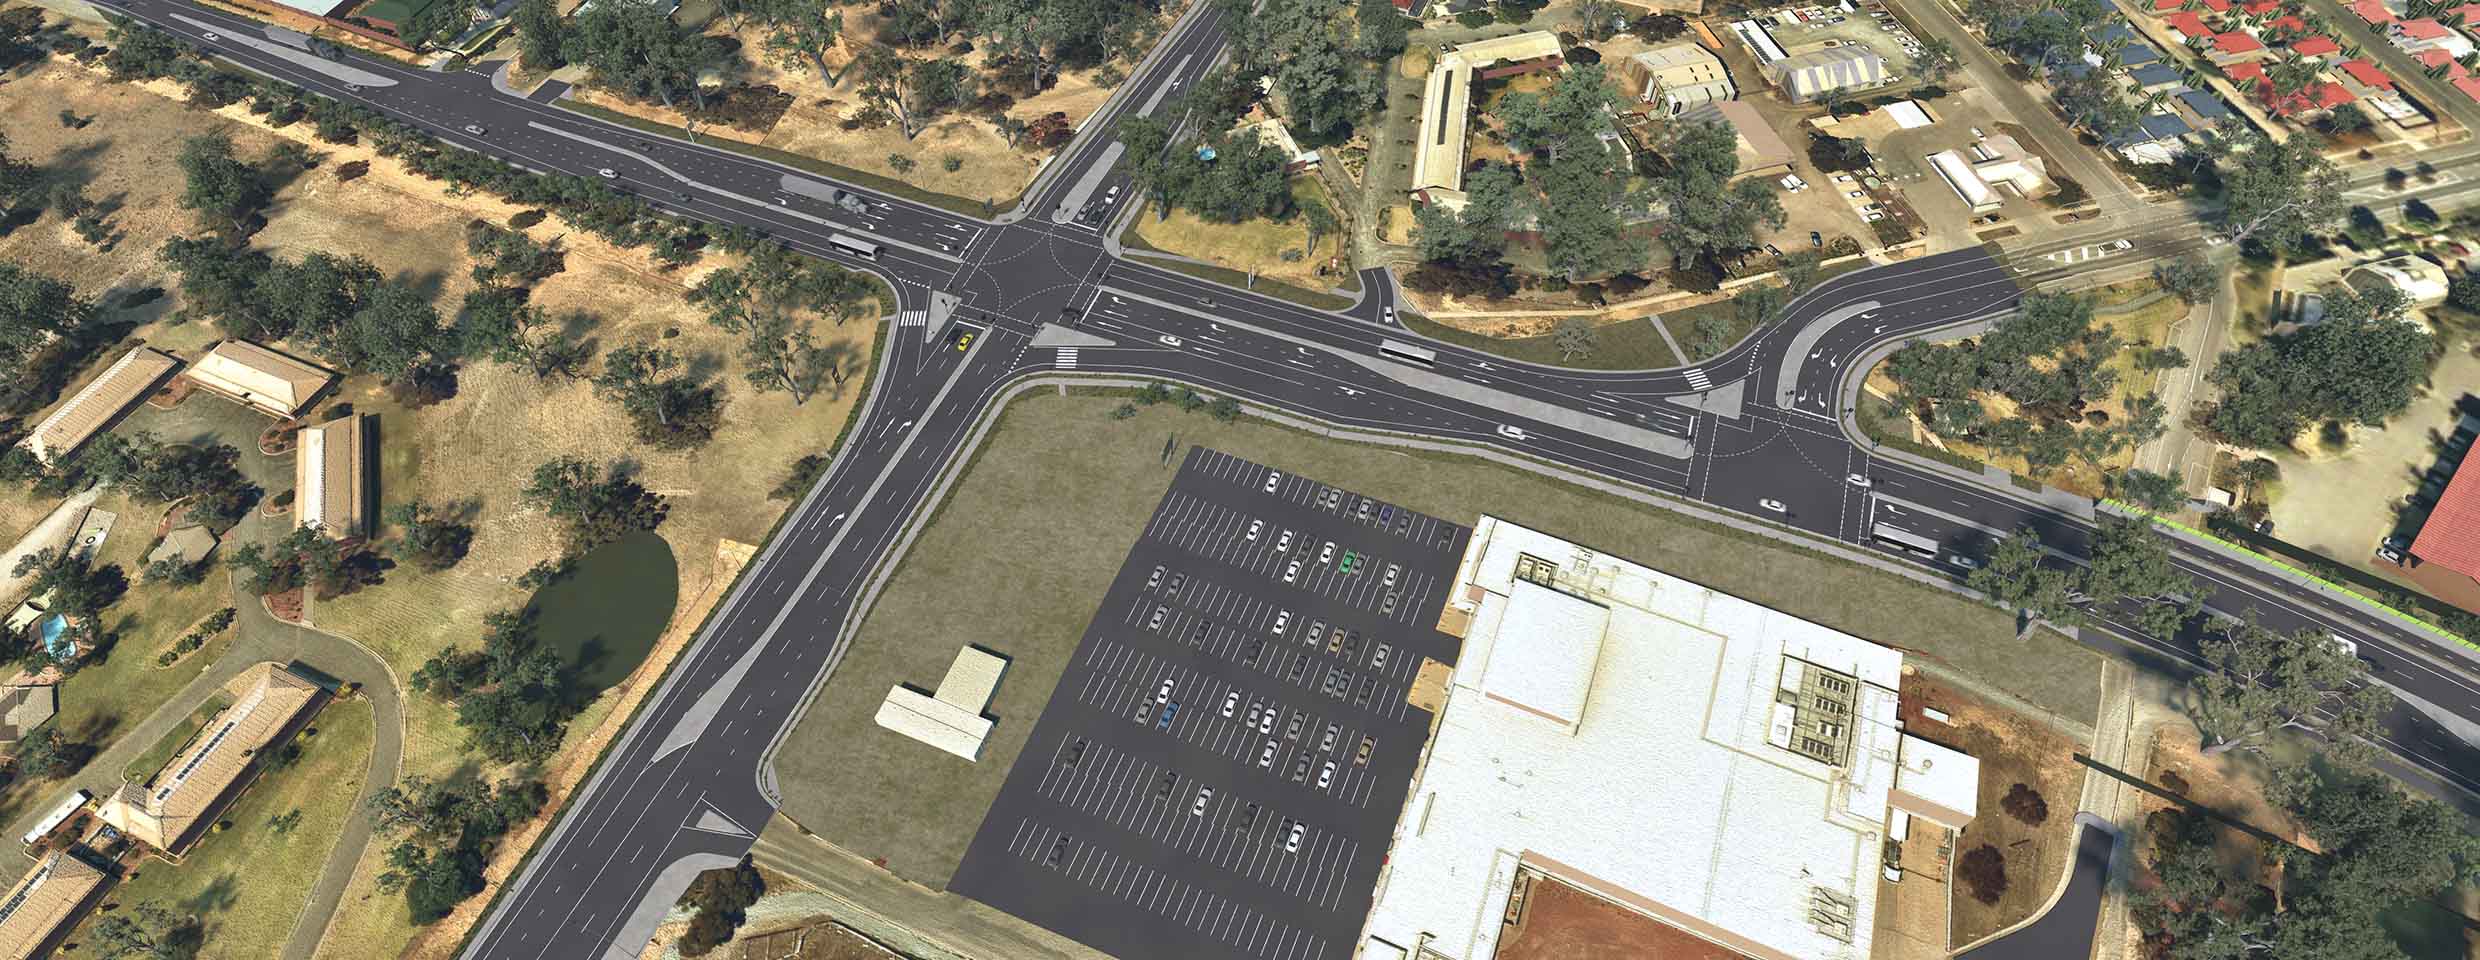 Intersection upgrades in Moama artist's impression subject to change